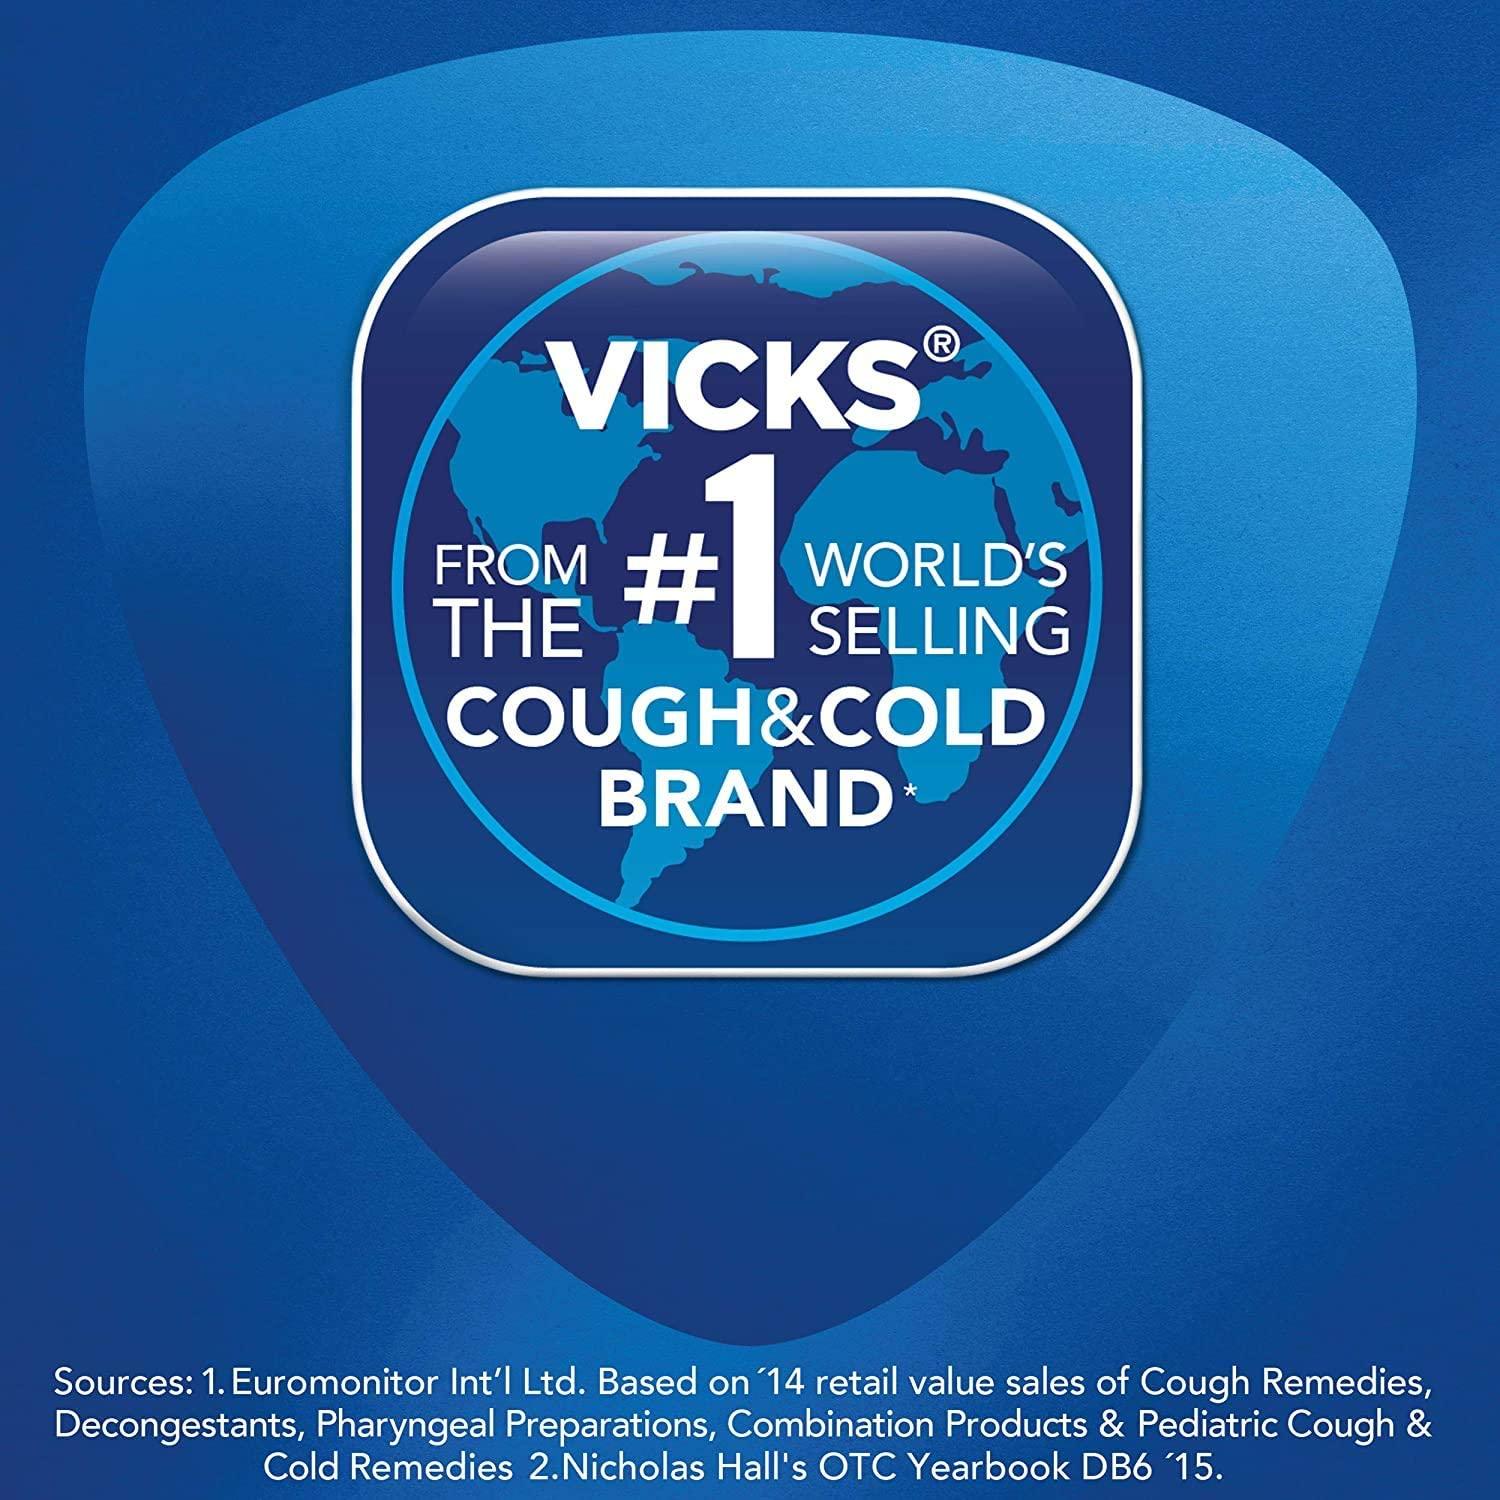 Vicks NyQuil Cold and Flu Multi-Symptom Relief, Nighttime, Sore Throat, Fever, and Congestion Relief, 8 LiquiCaps 